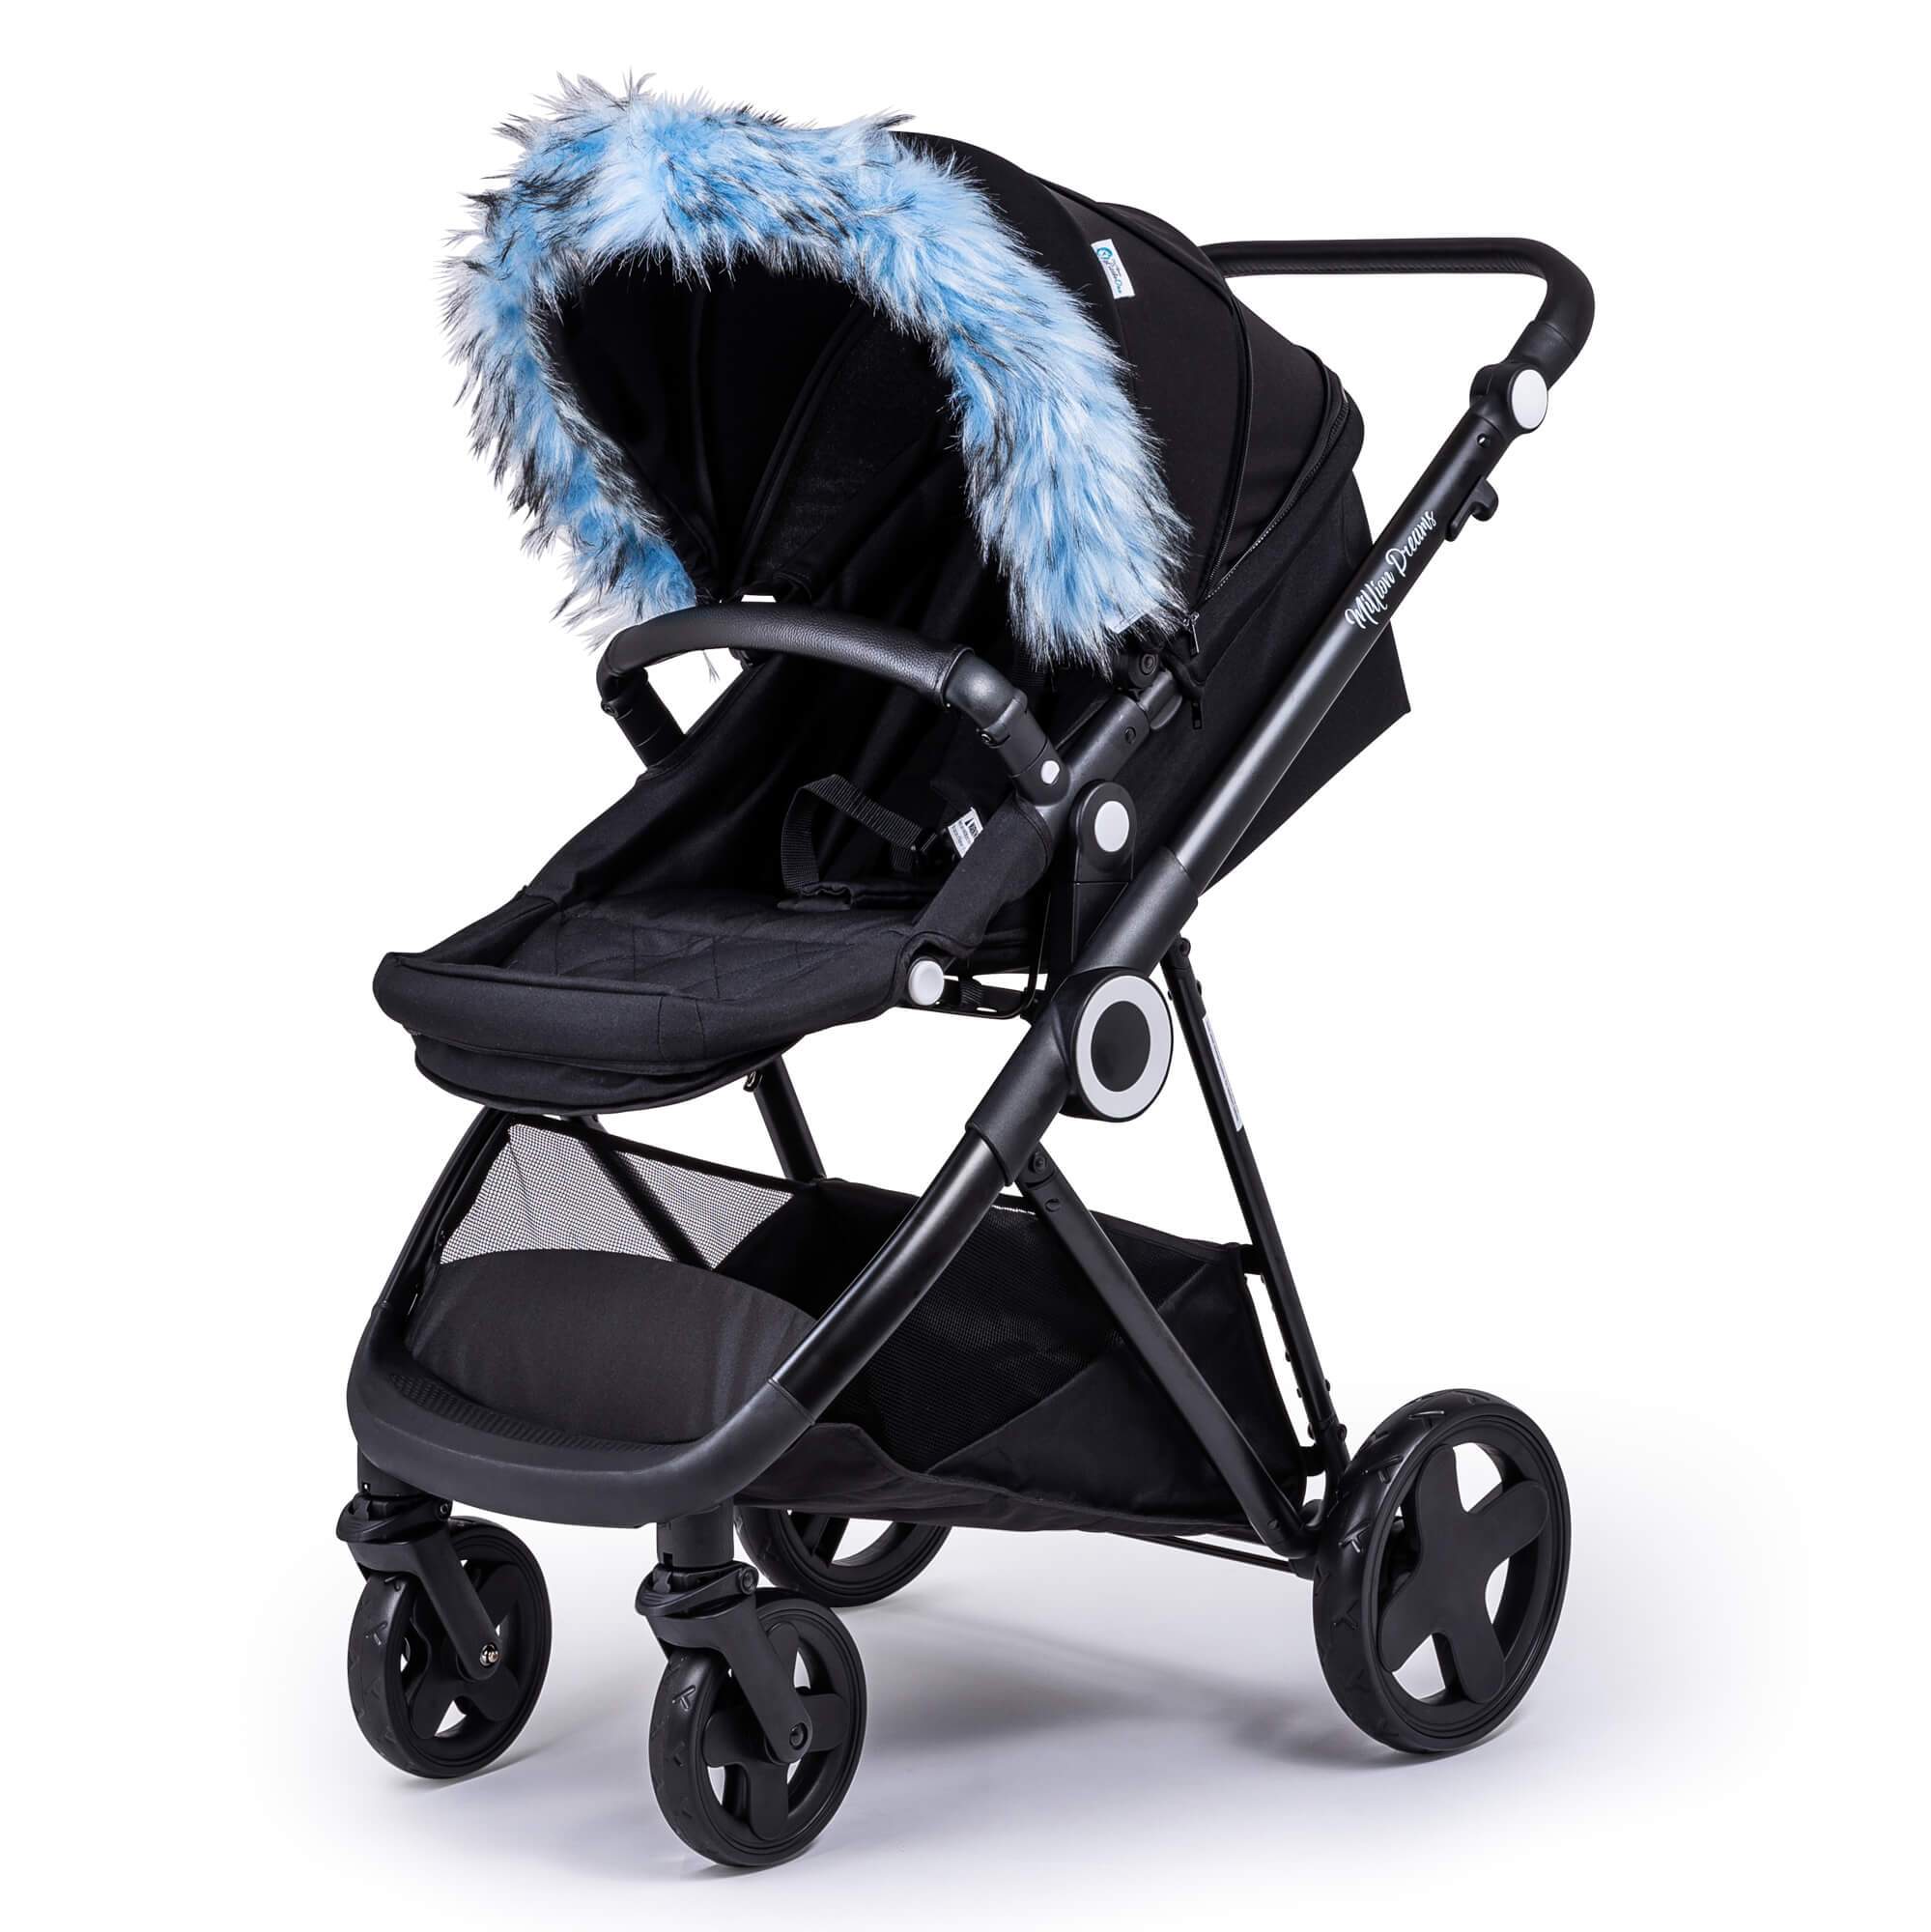 Pram Fur Hood Trim Attachment for Pushchair Compatible with Bumbleride - Light Blue / Fits All Models | For Your Little One